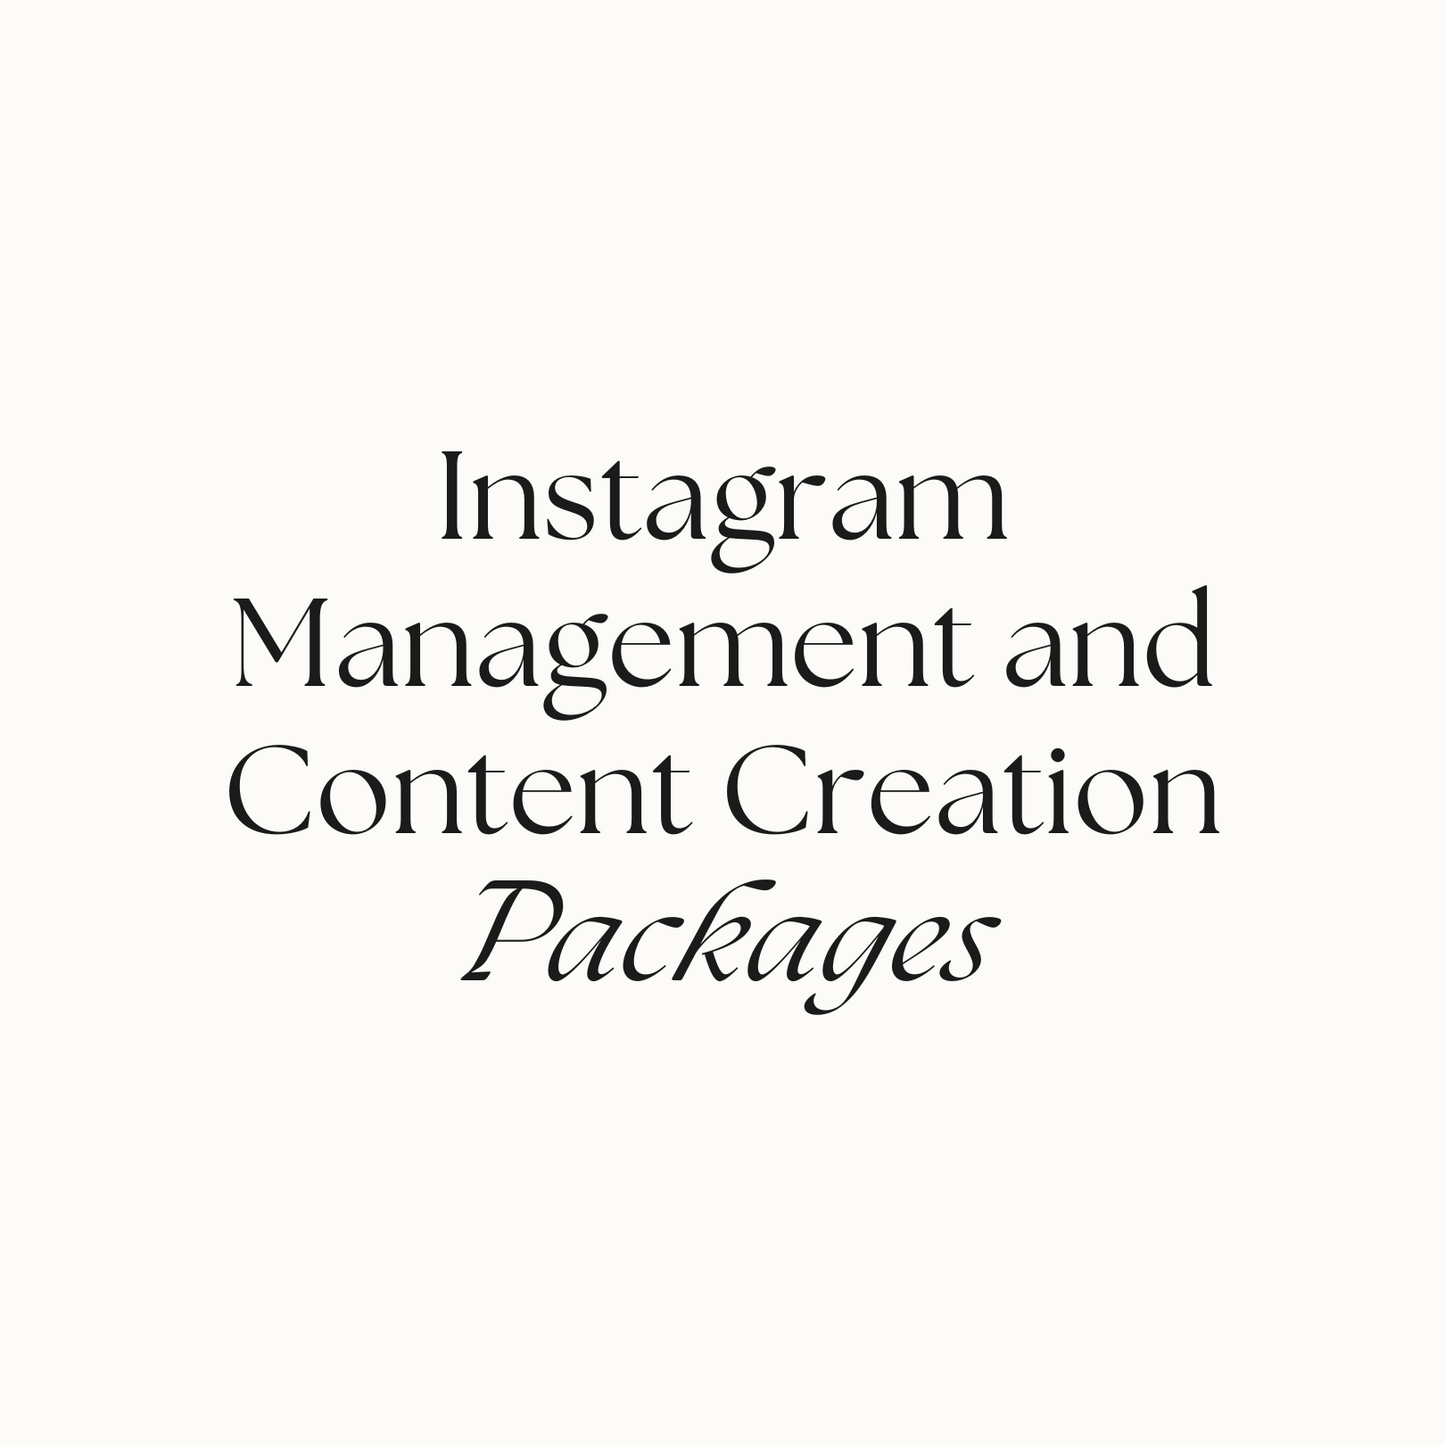 Instagram Management and Content Creation Packages